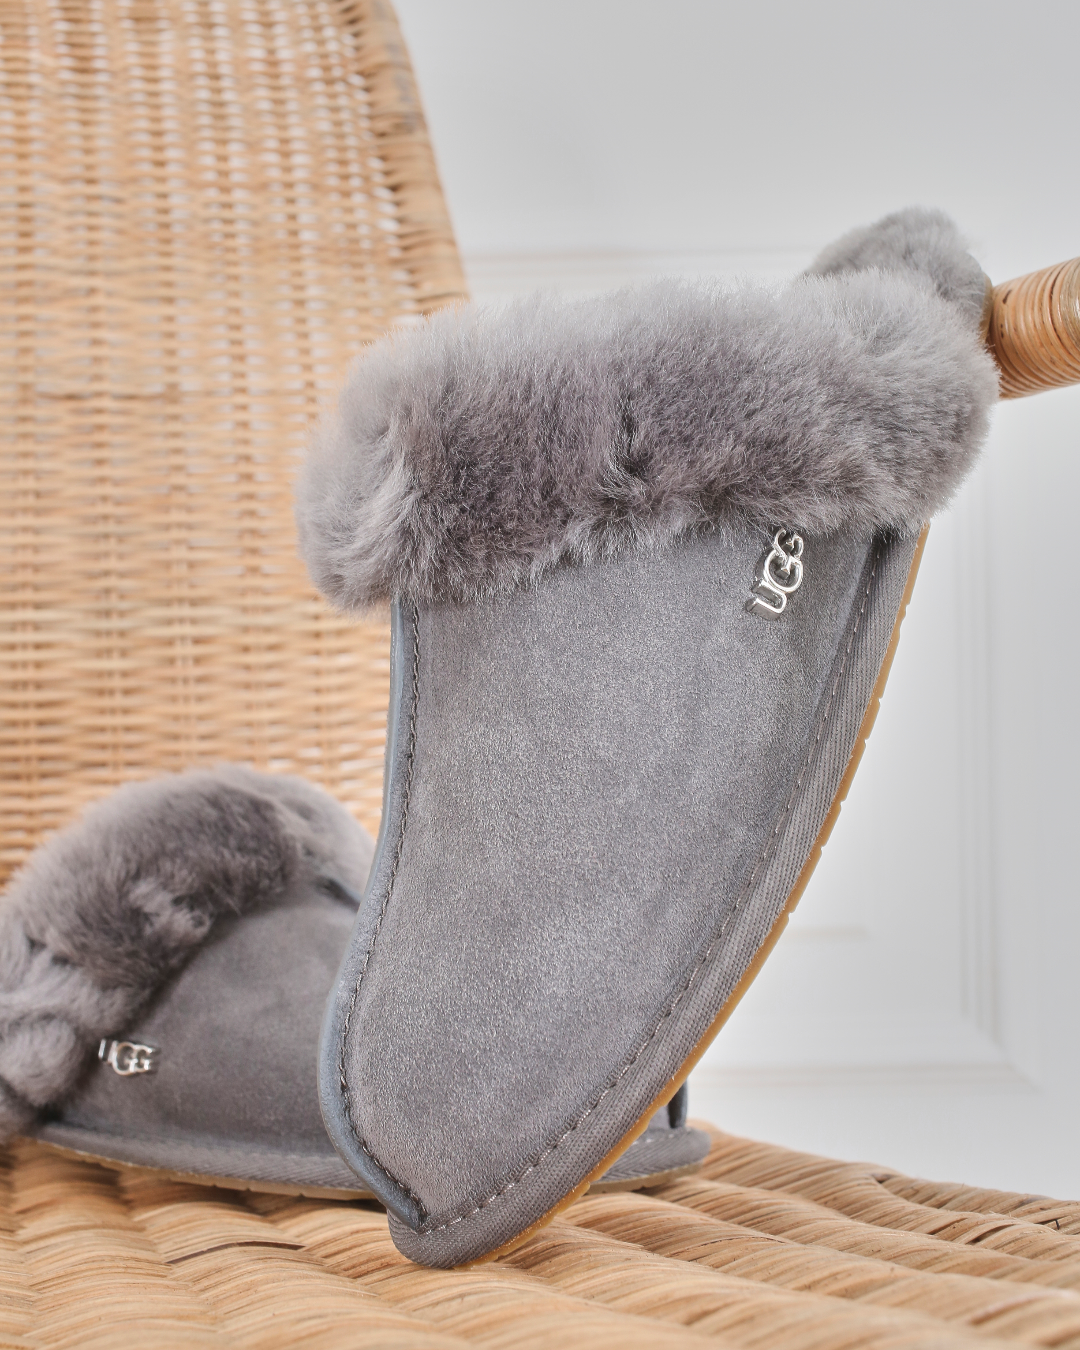 Sophisticated UGG Scuffette slippers in slate grey.